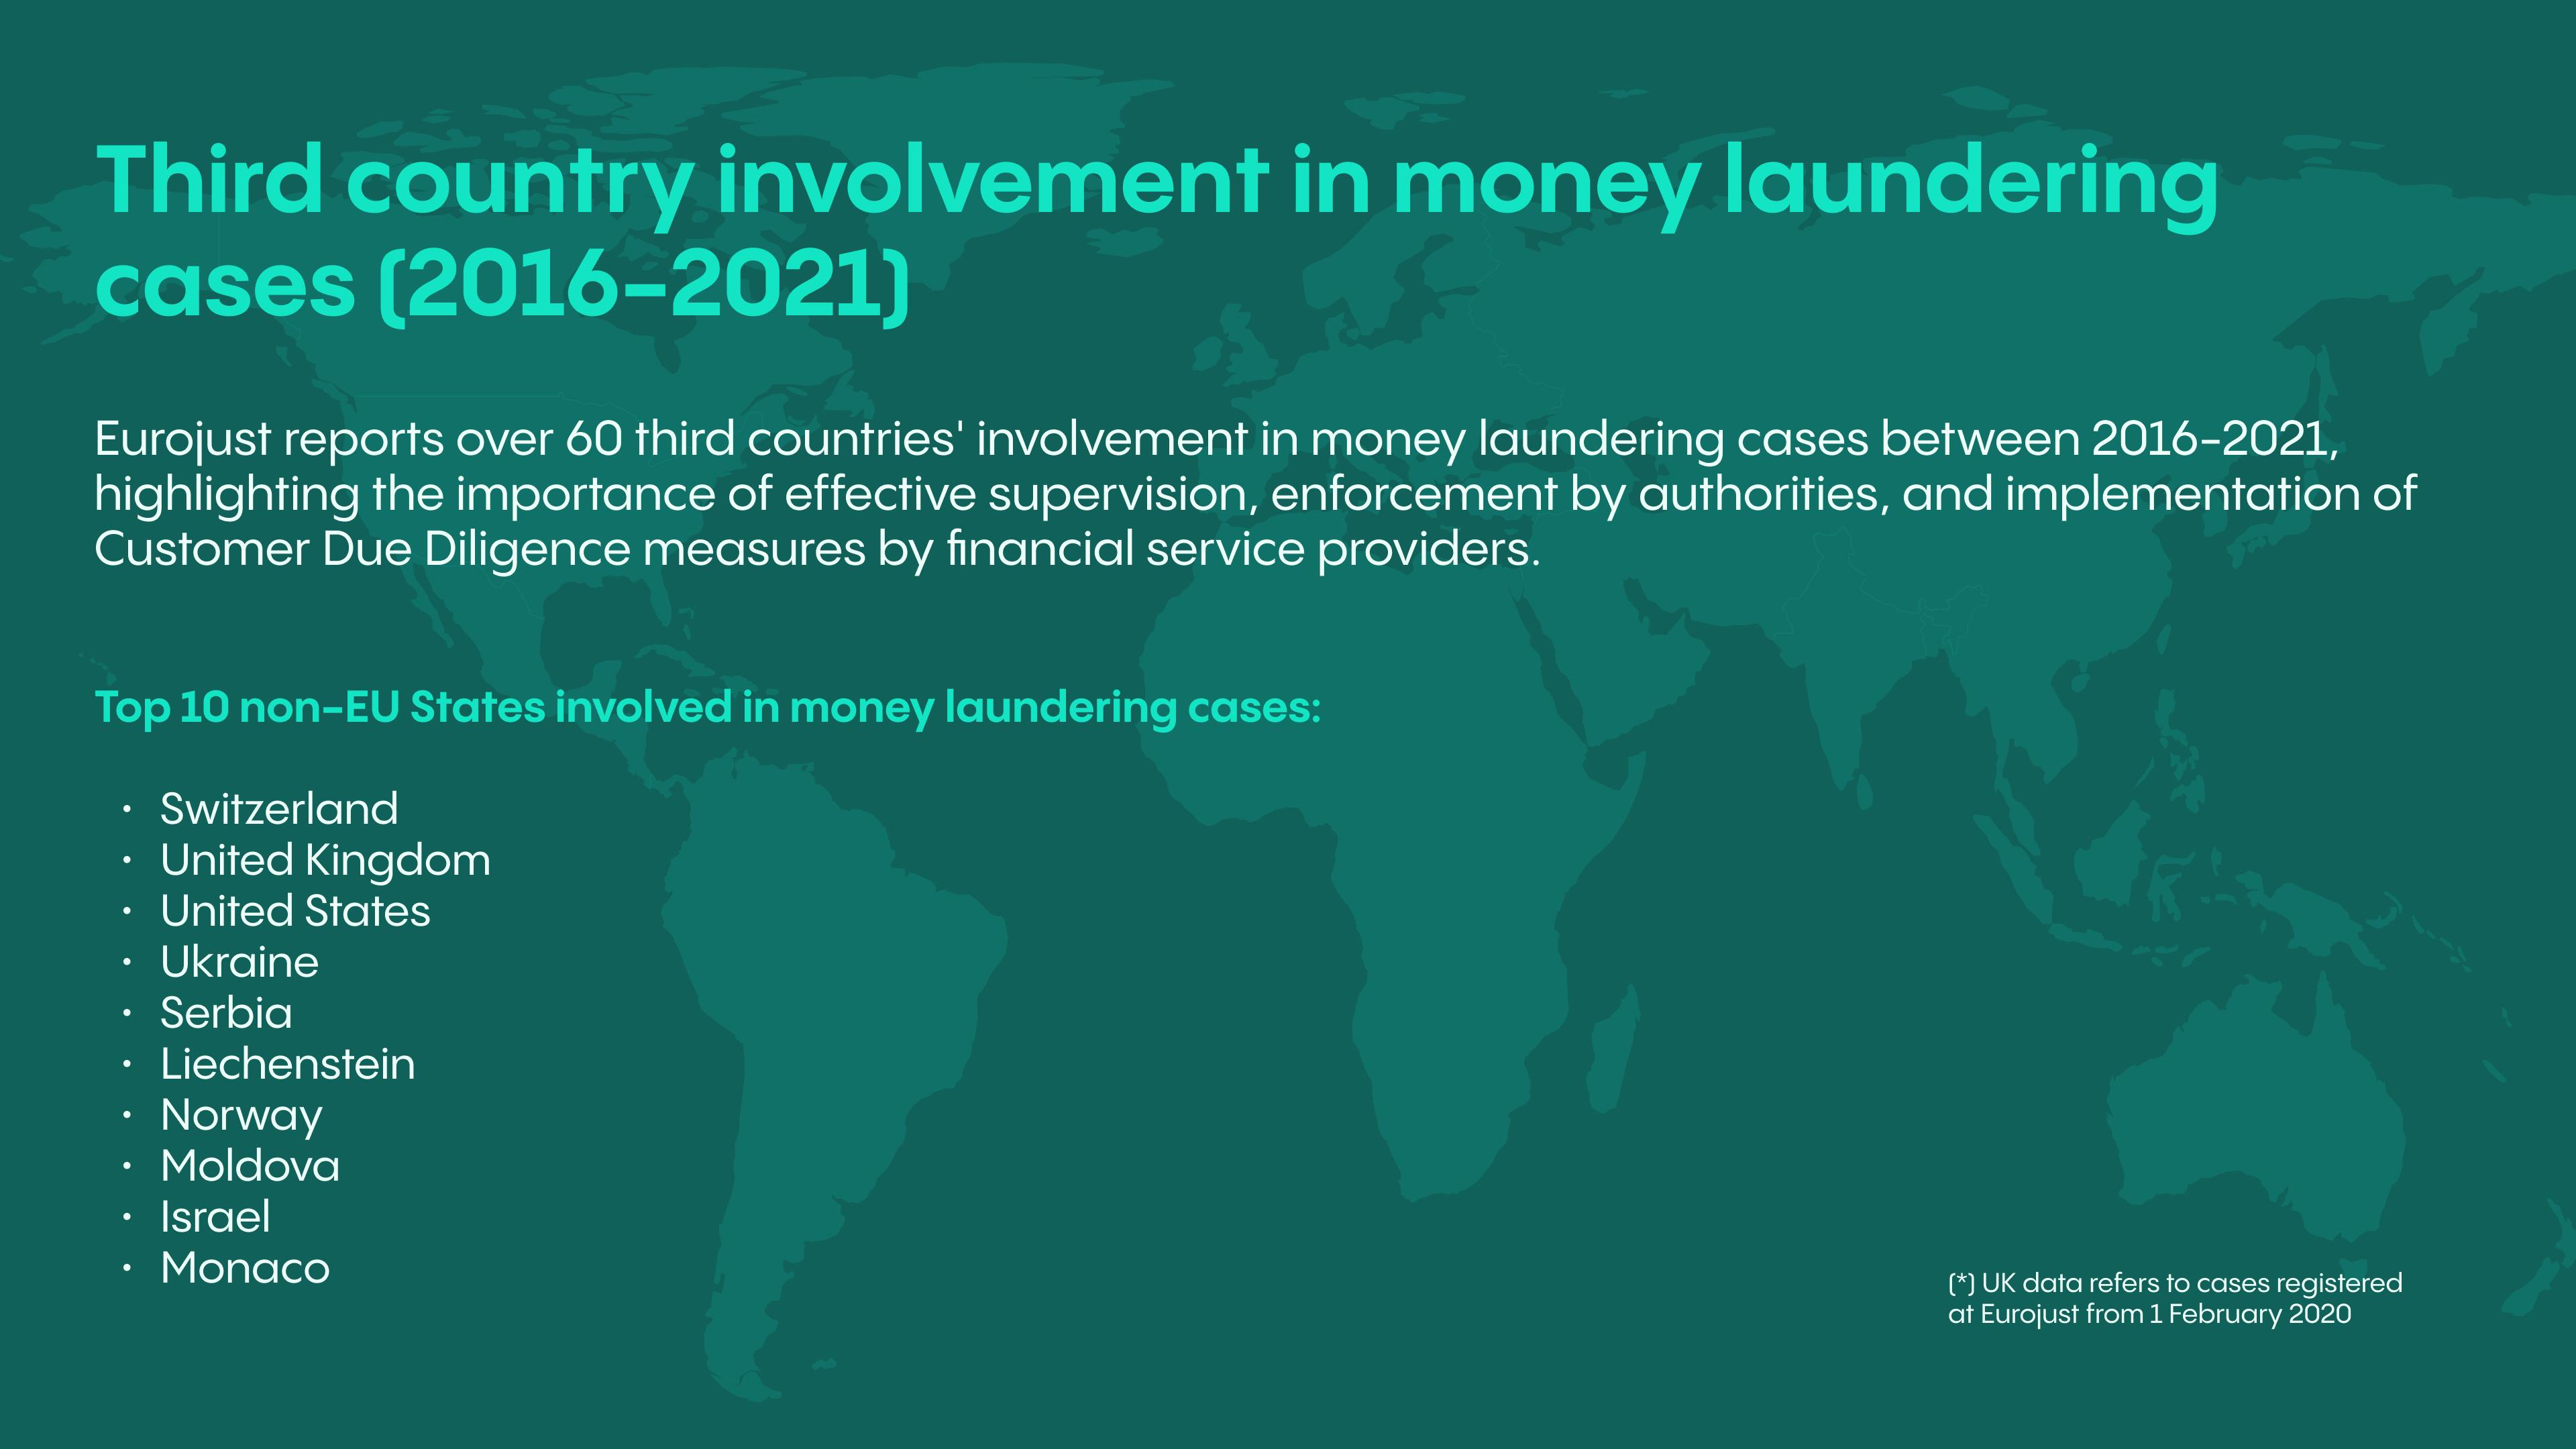 Non-EU countries' involvement in money laundering cases